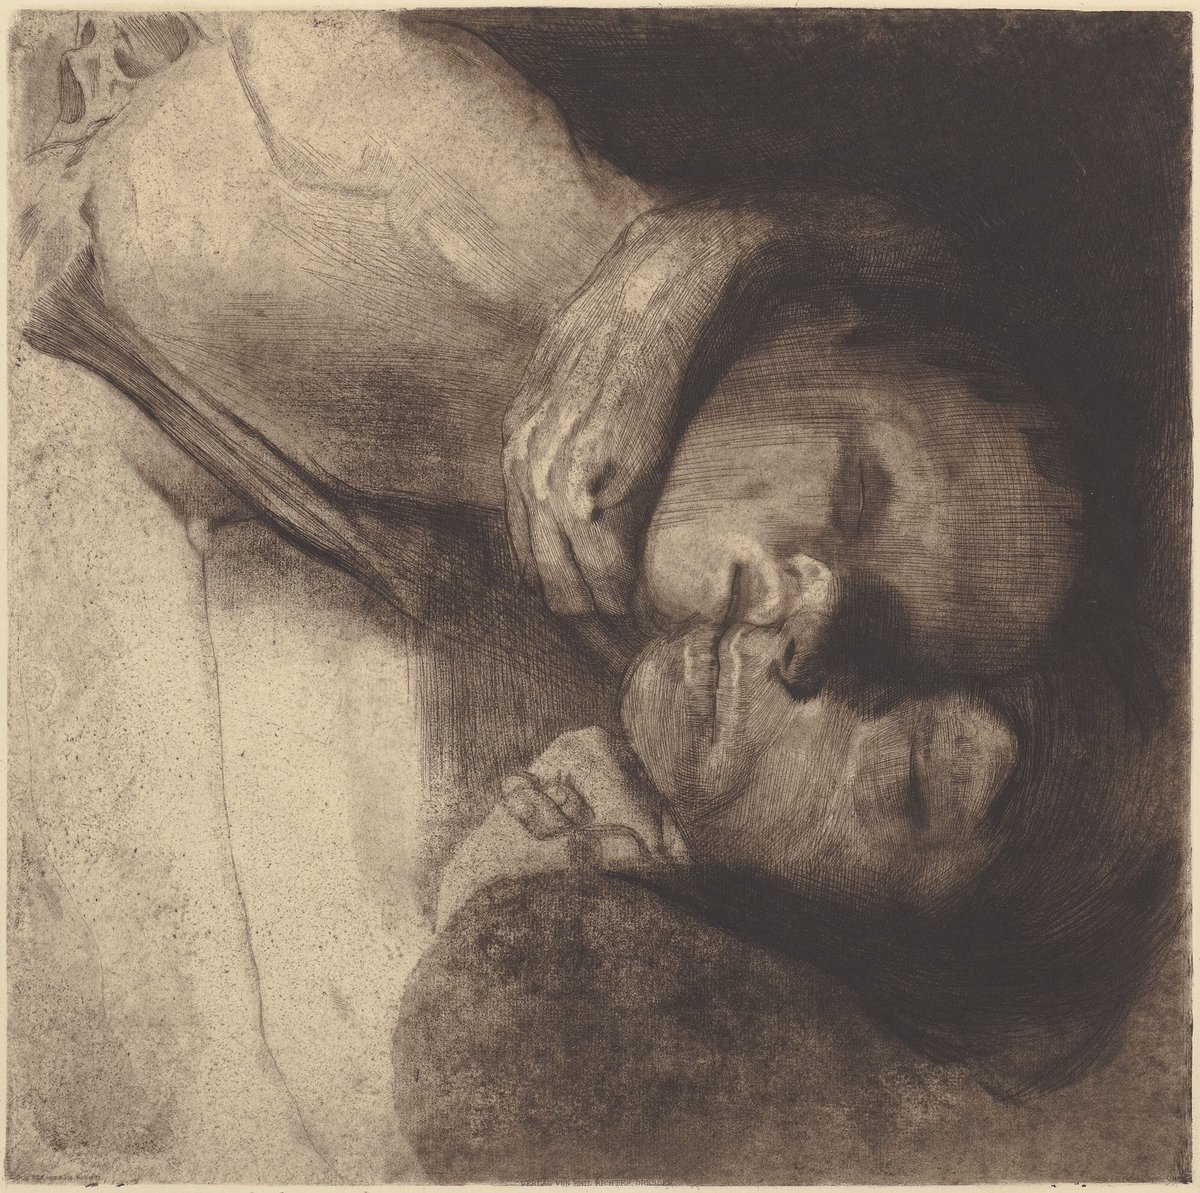 Woman with Dead Child (1903) is so powerful in its animal grief & contrasts with the beautiful Child’s Head on It’s Mother’s Arms (1900) & the amazing Death, Woman & Child